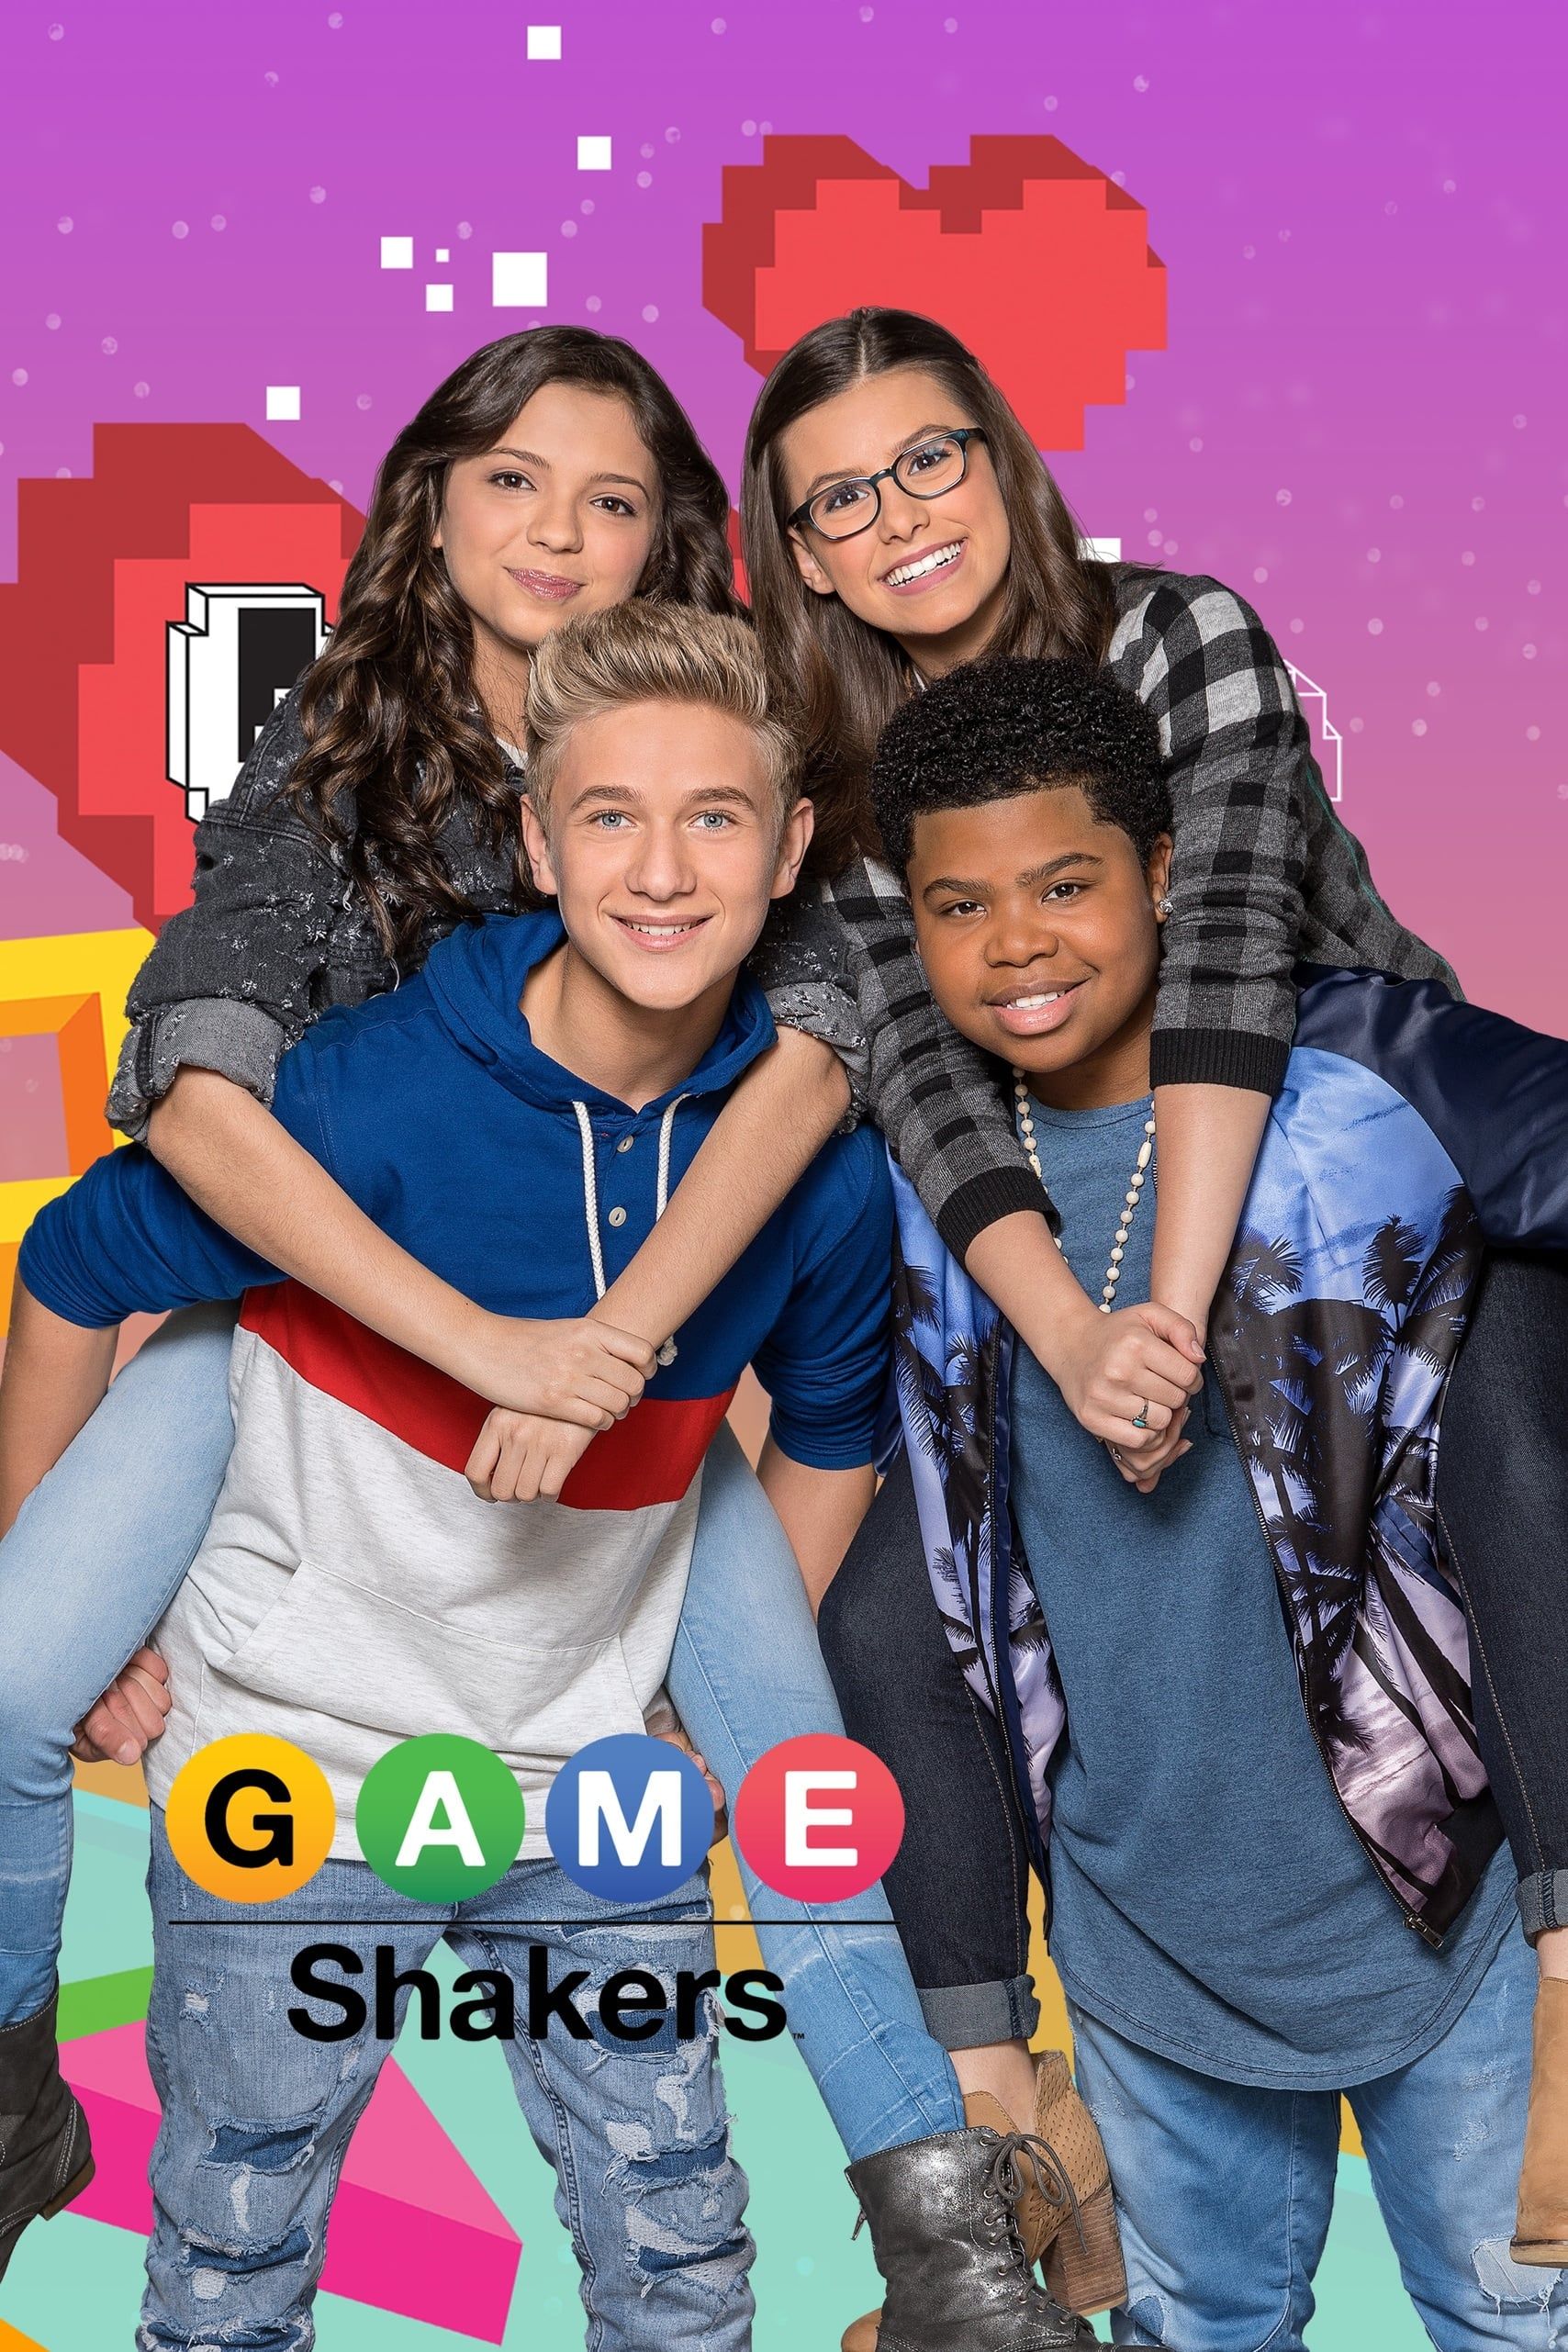 BABE/Game Shakers  Tv show outfits, Babe carano, Teenager outfits